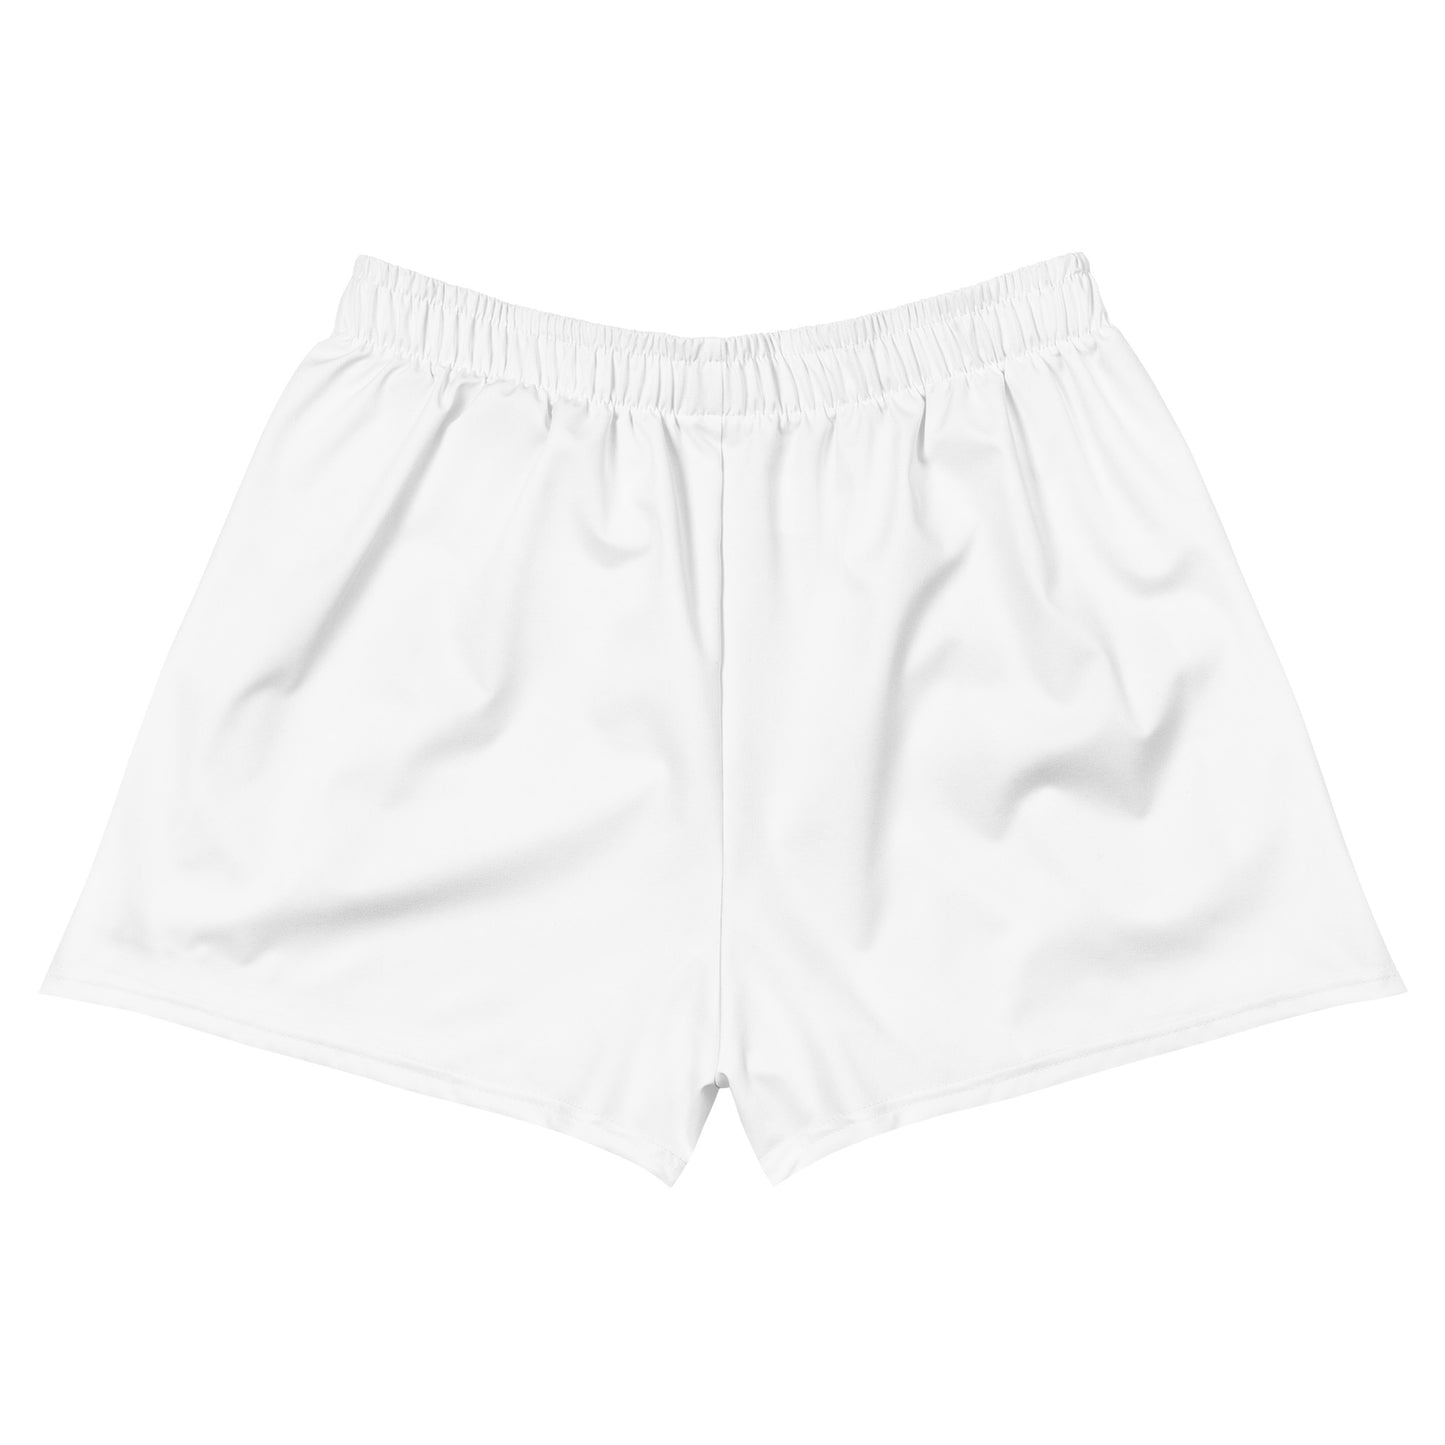 Tchad Map Women’s Recycled Athletic Shorts